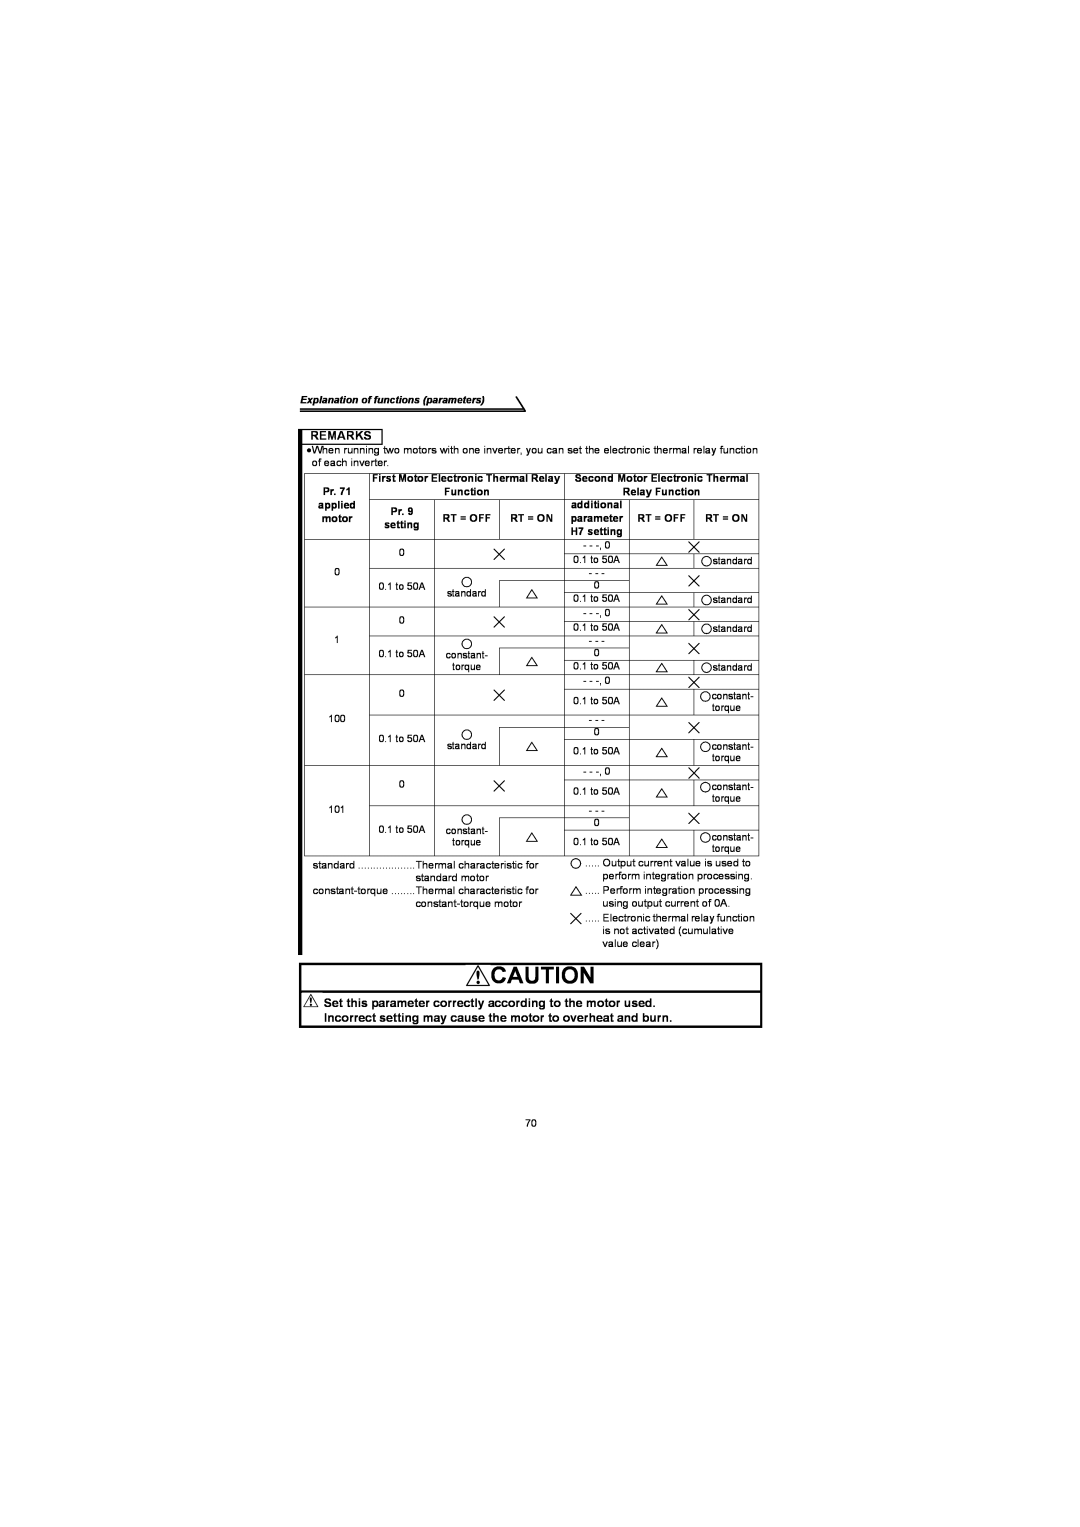 Mitsubishi Electronics FR-S500 instruction manual Remarks, Explanation of functions parameters 